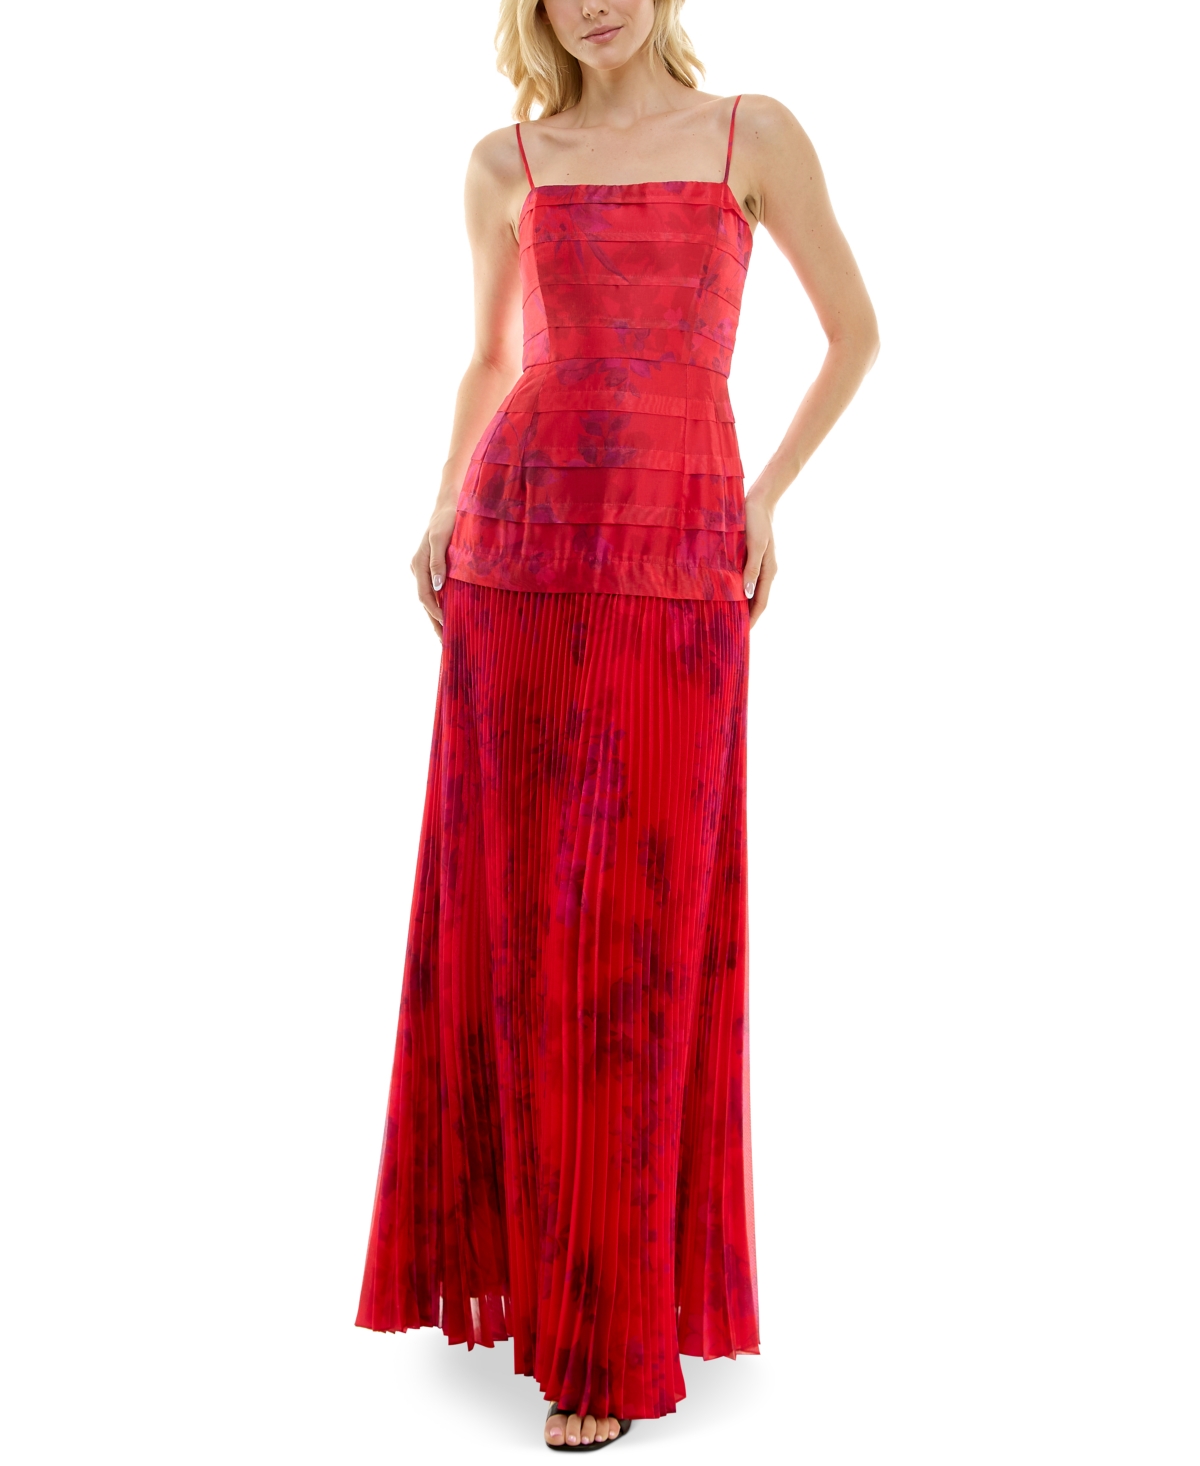 Women's Floral-Print Pleated Gown - Scarlet